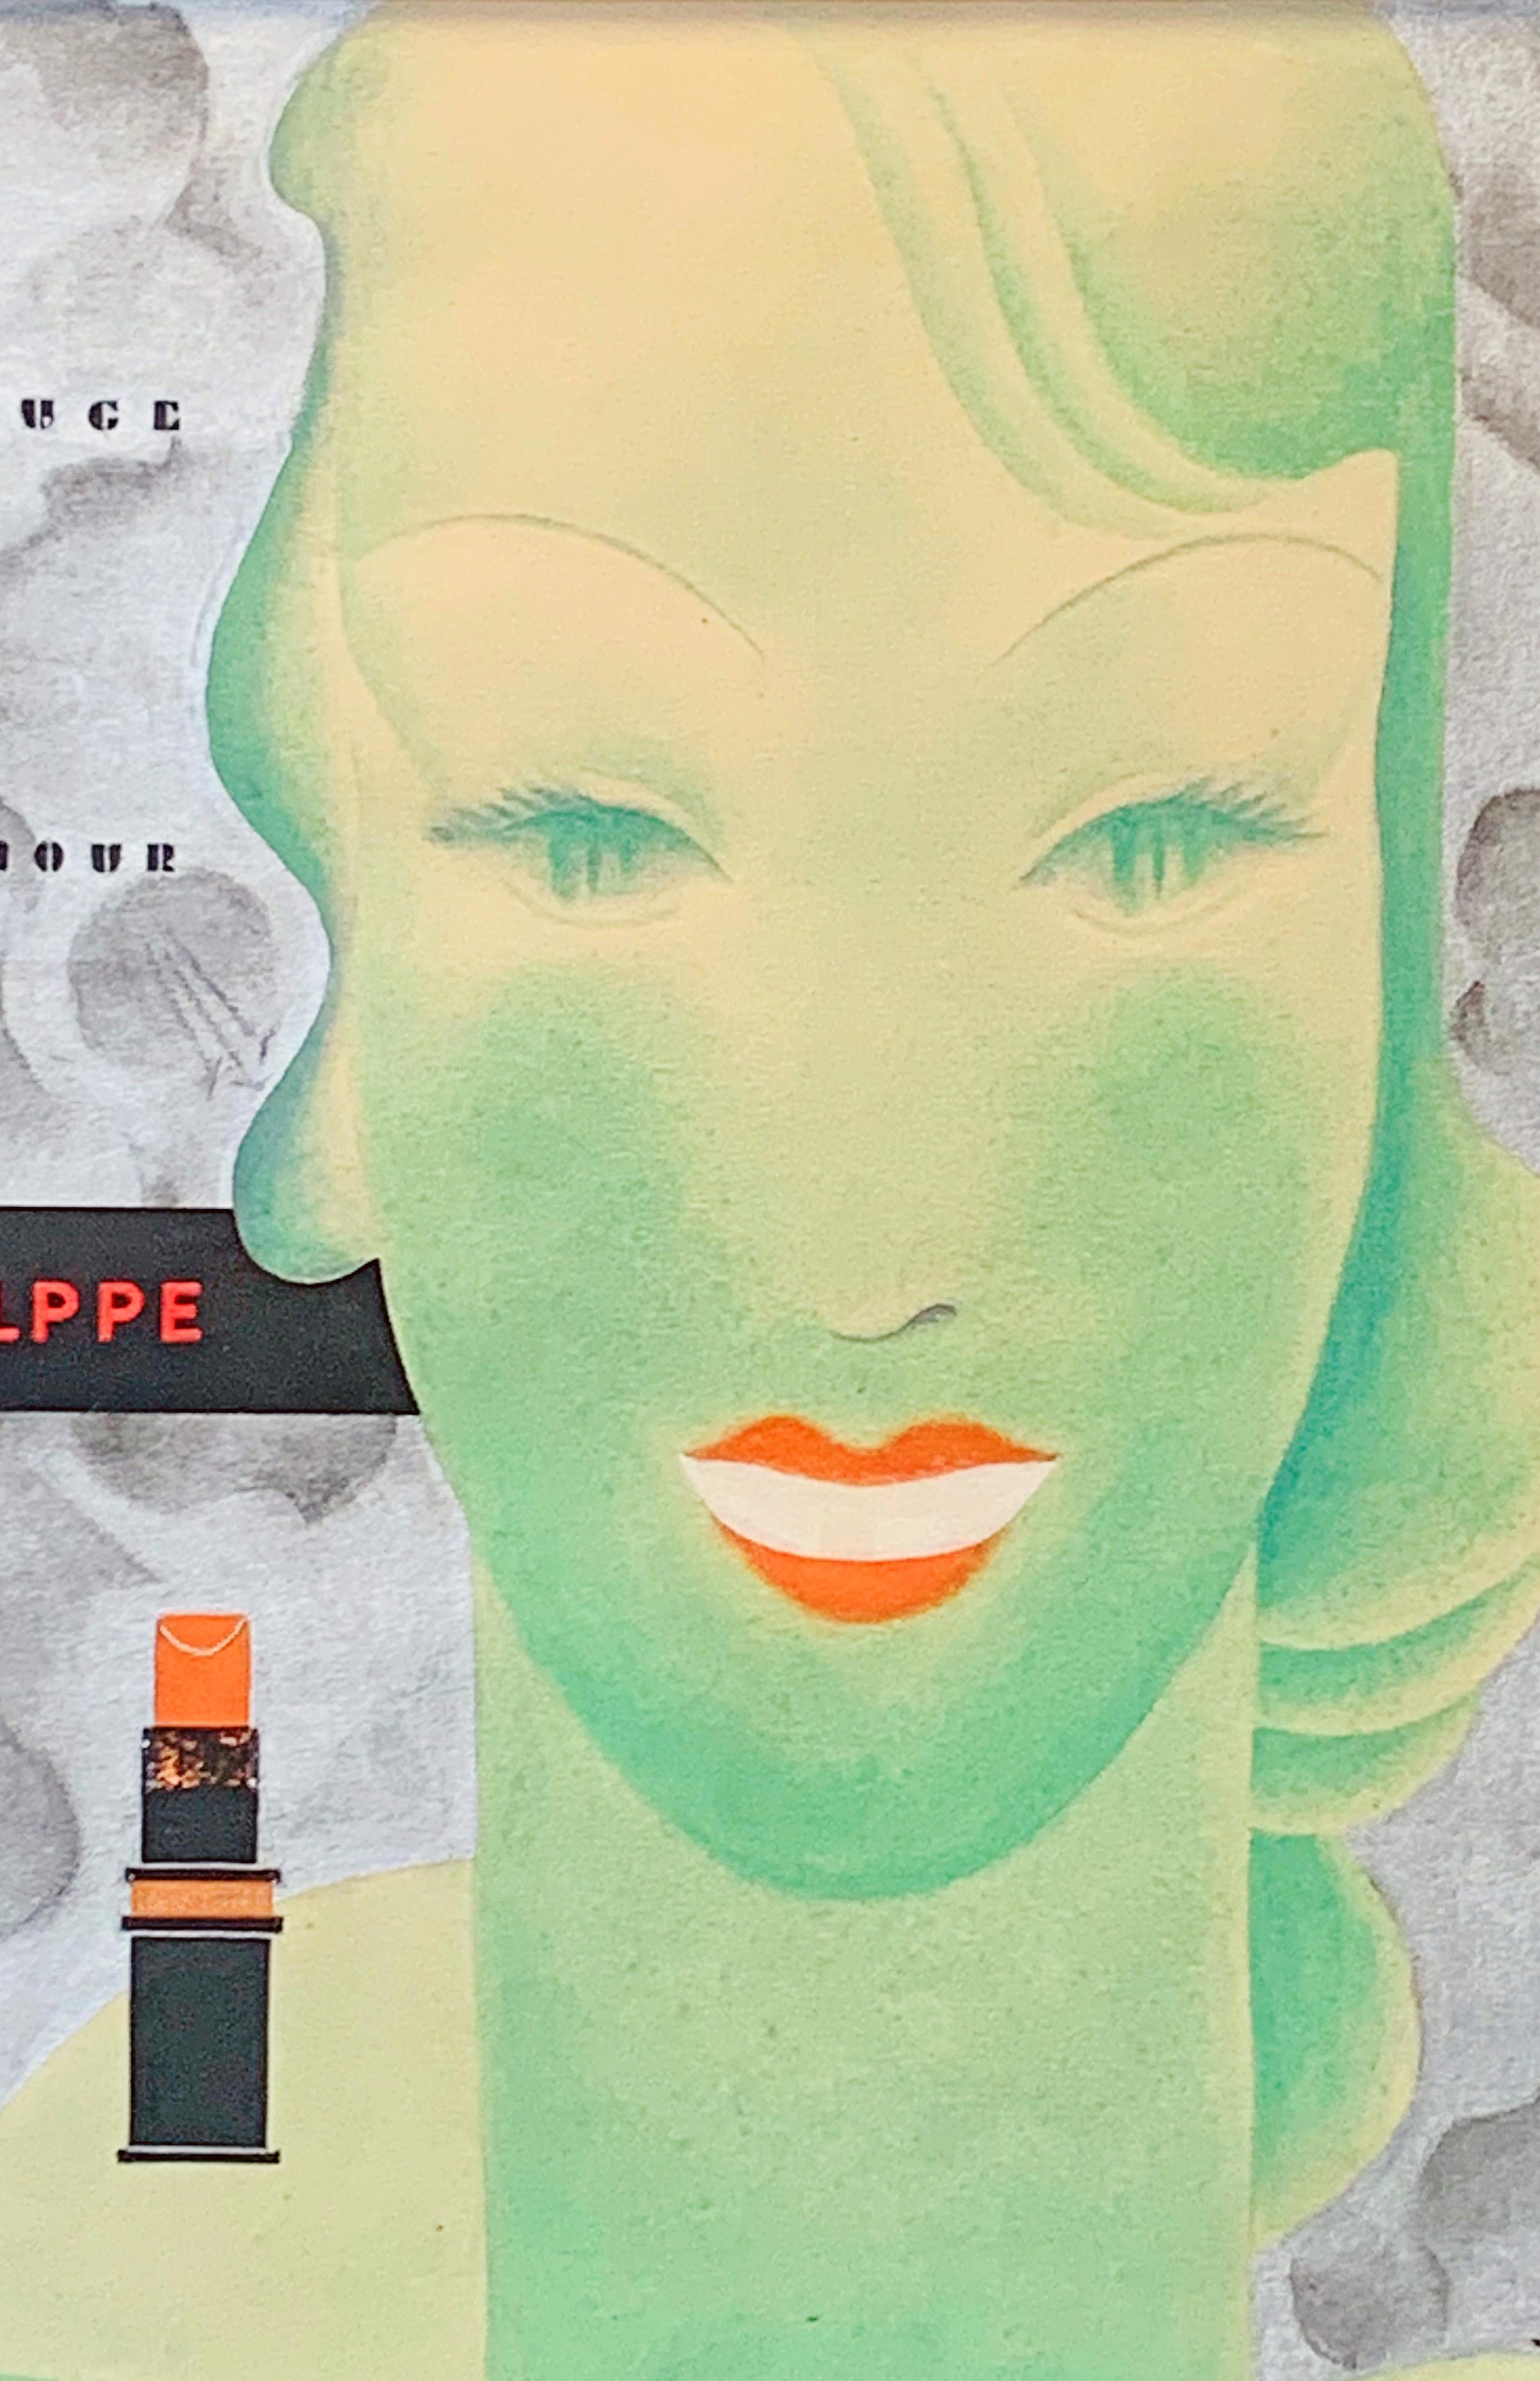 Brilliantly conceived and executed, this original painting from the 1940s was proposed for an advertisement that would market three red lipsticks made by Louis Philippe, with the memorable tagline, 